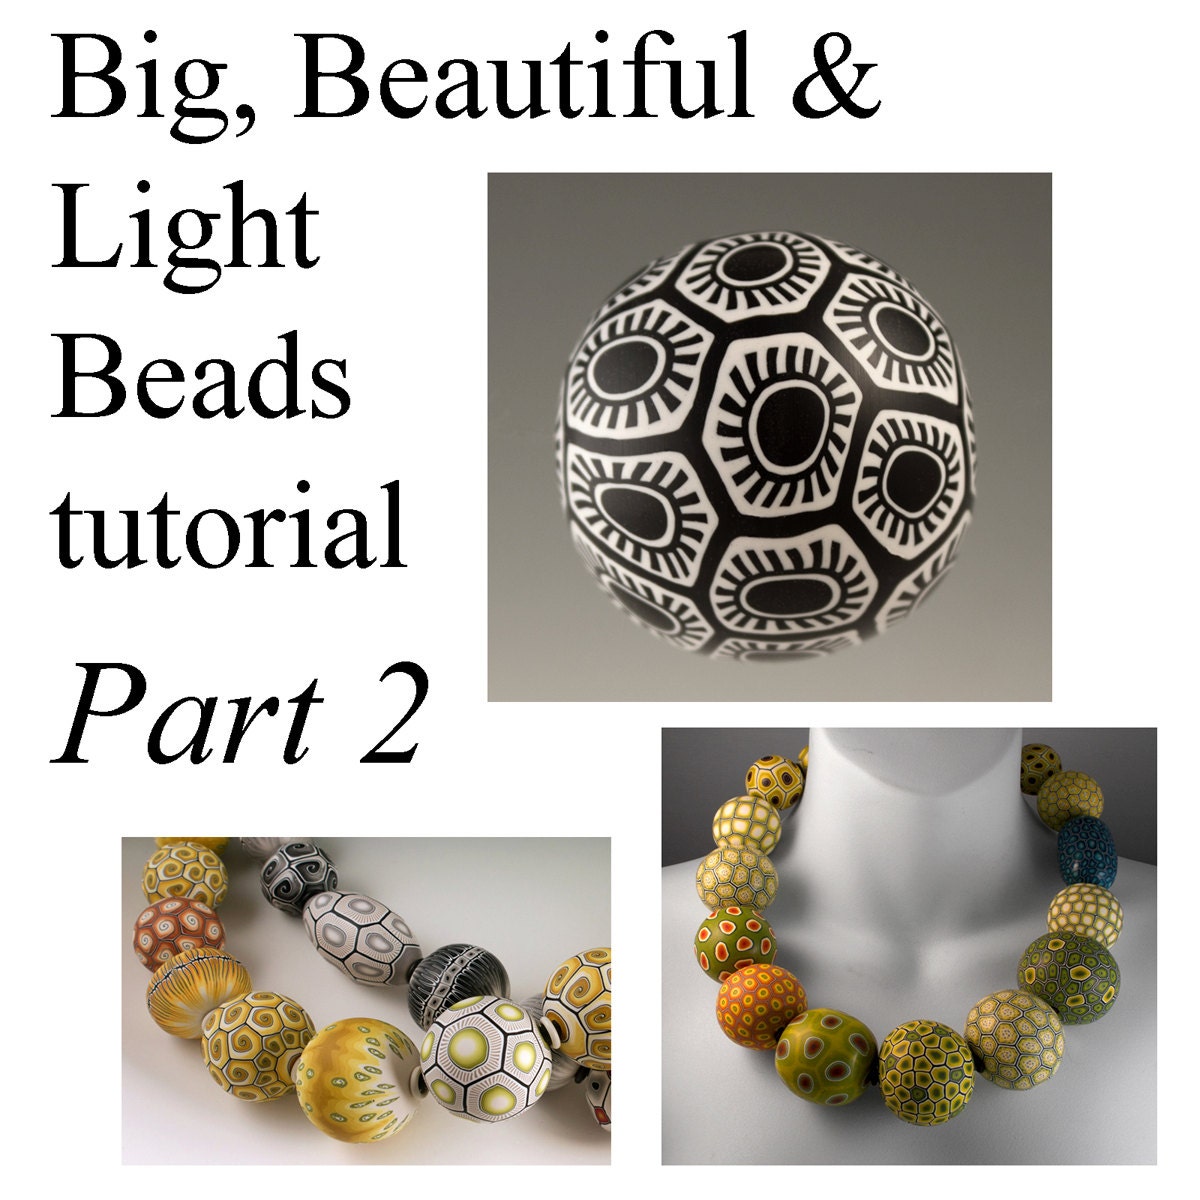 Hollow Beads Polymer Clay Tutorial Learn How to Make Beads in